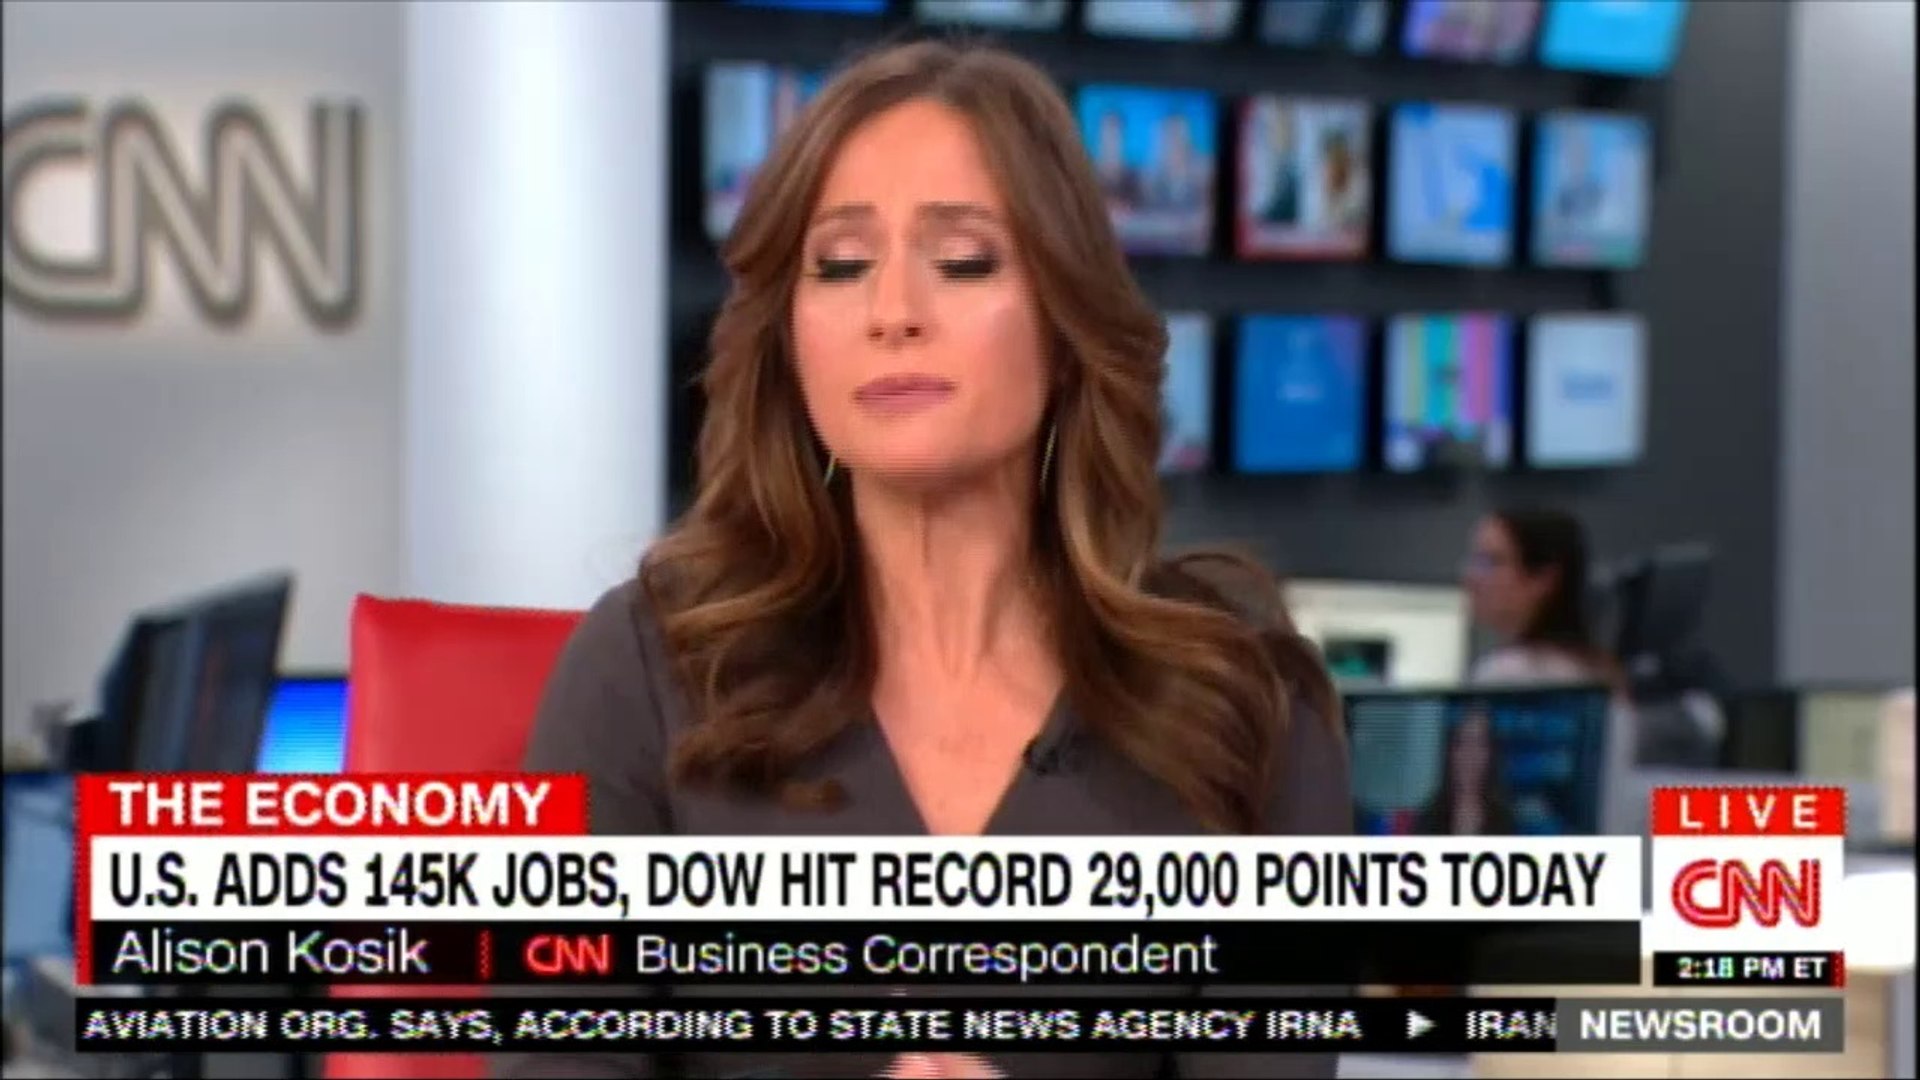 Alison Kosik comments on U.S. adds 145K Jobs, Dow hit record 29,000 points  today. #Business #Money #AlisonKosik @AlisonKosik #CNN - video Dailymotion